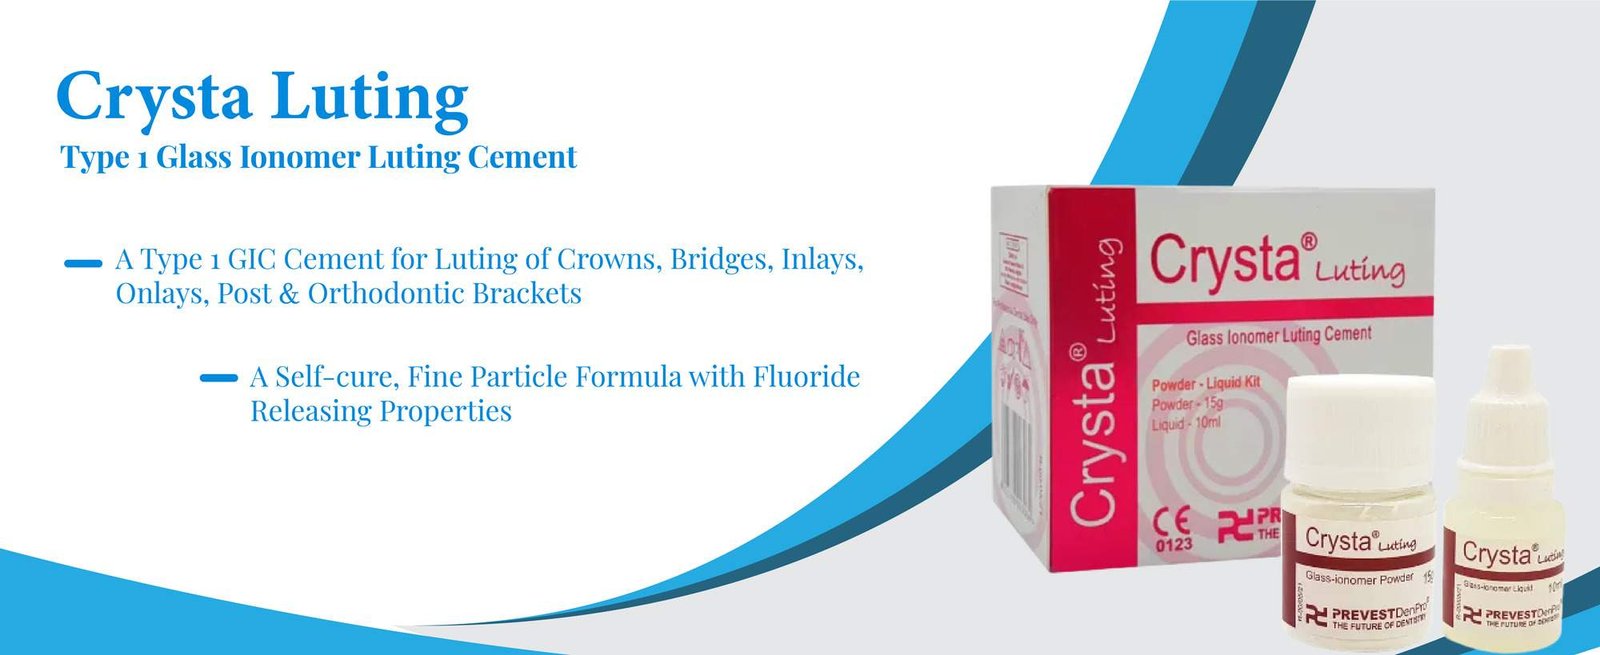 type 2 luting glass ionomer cement